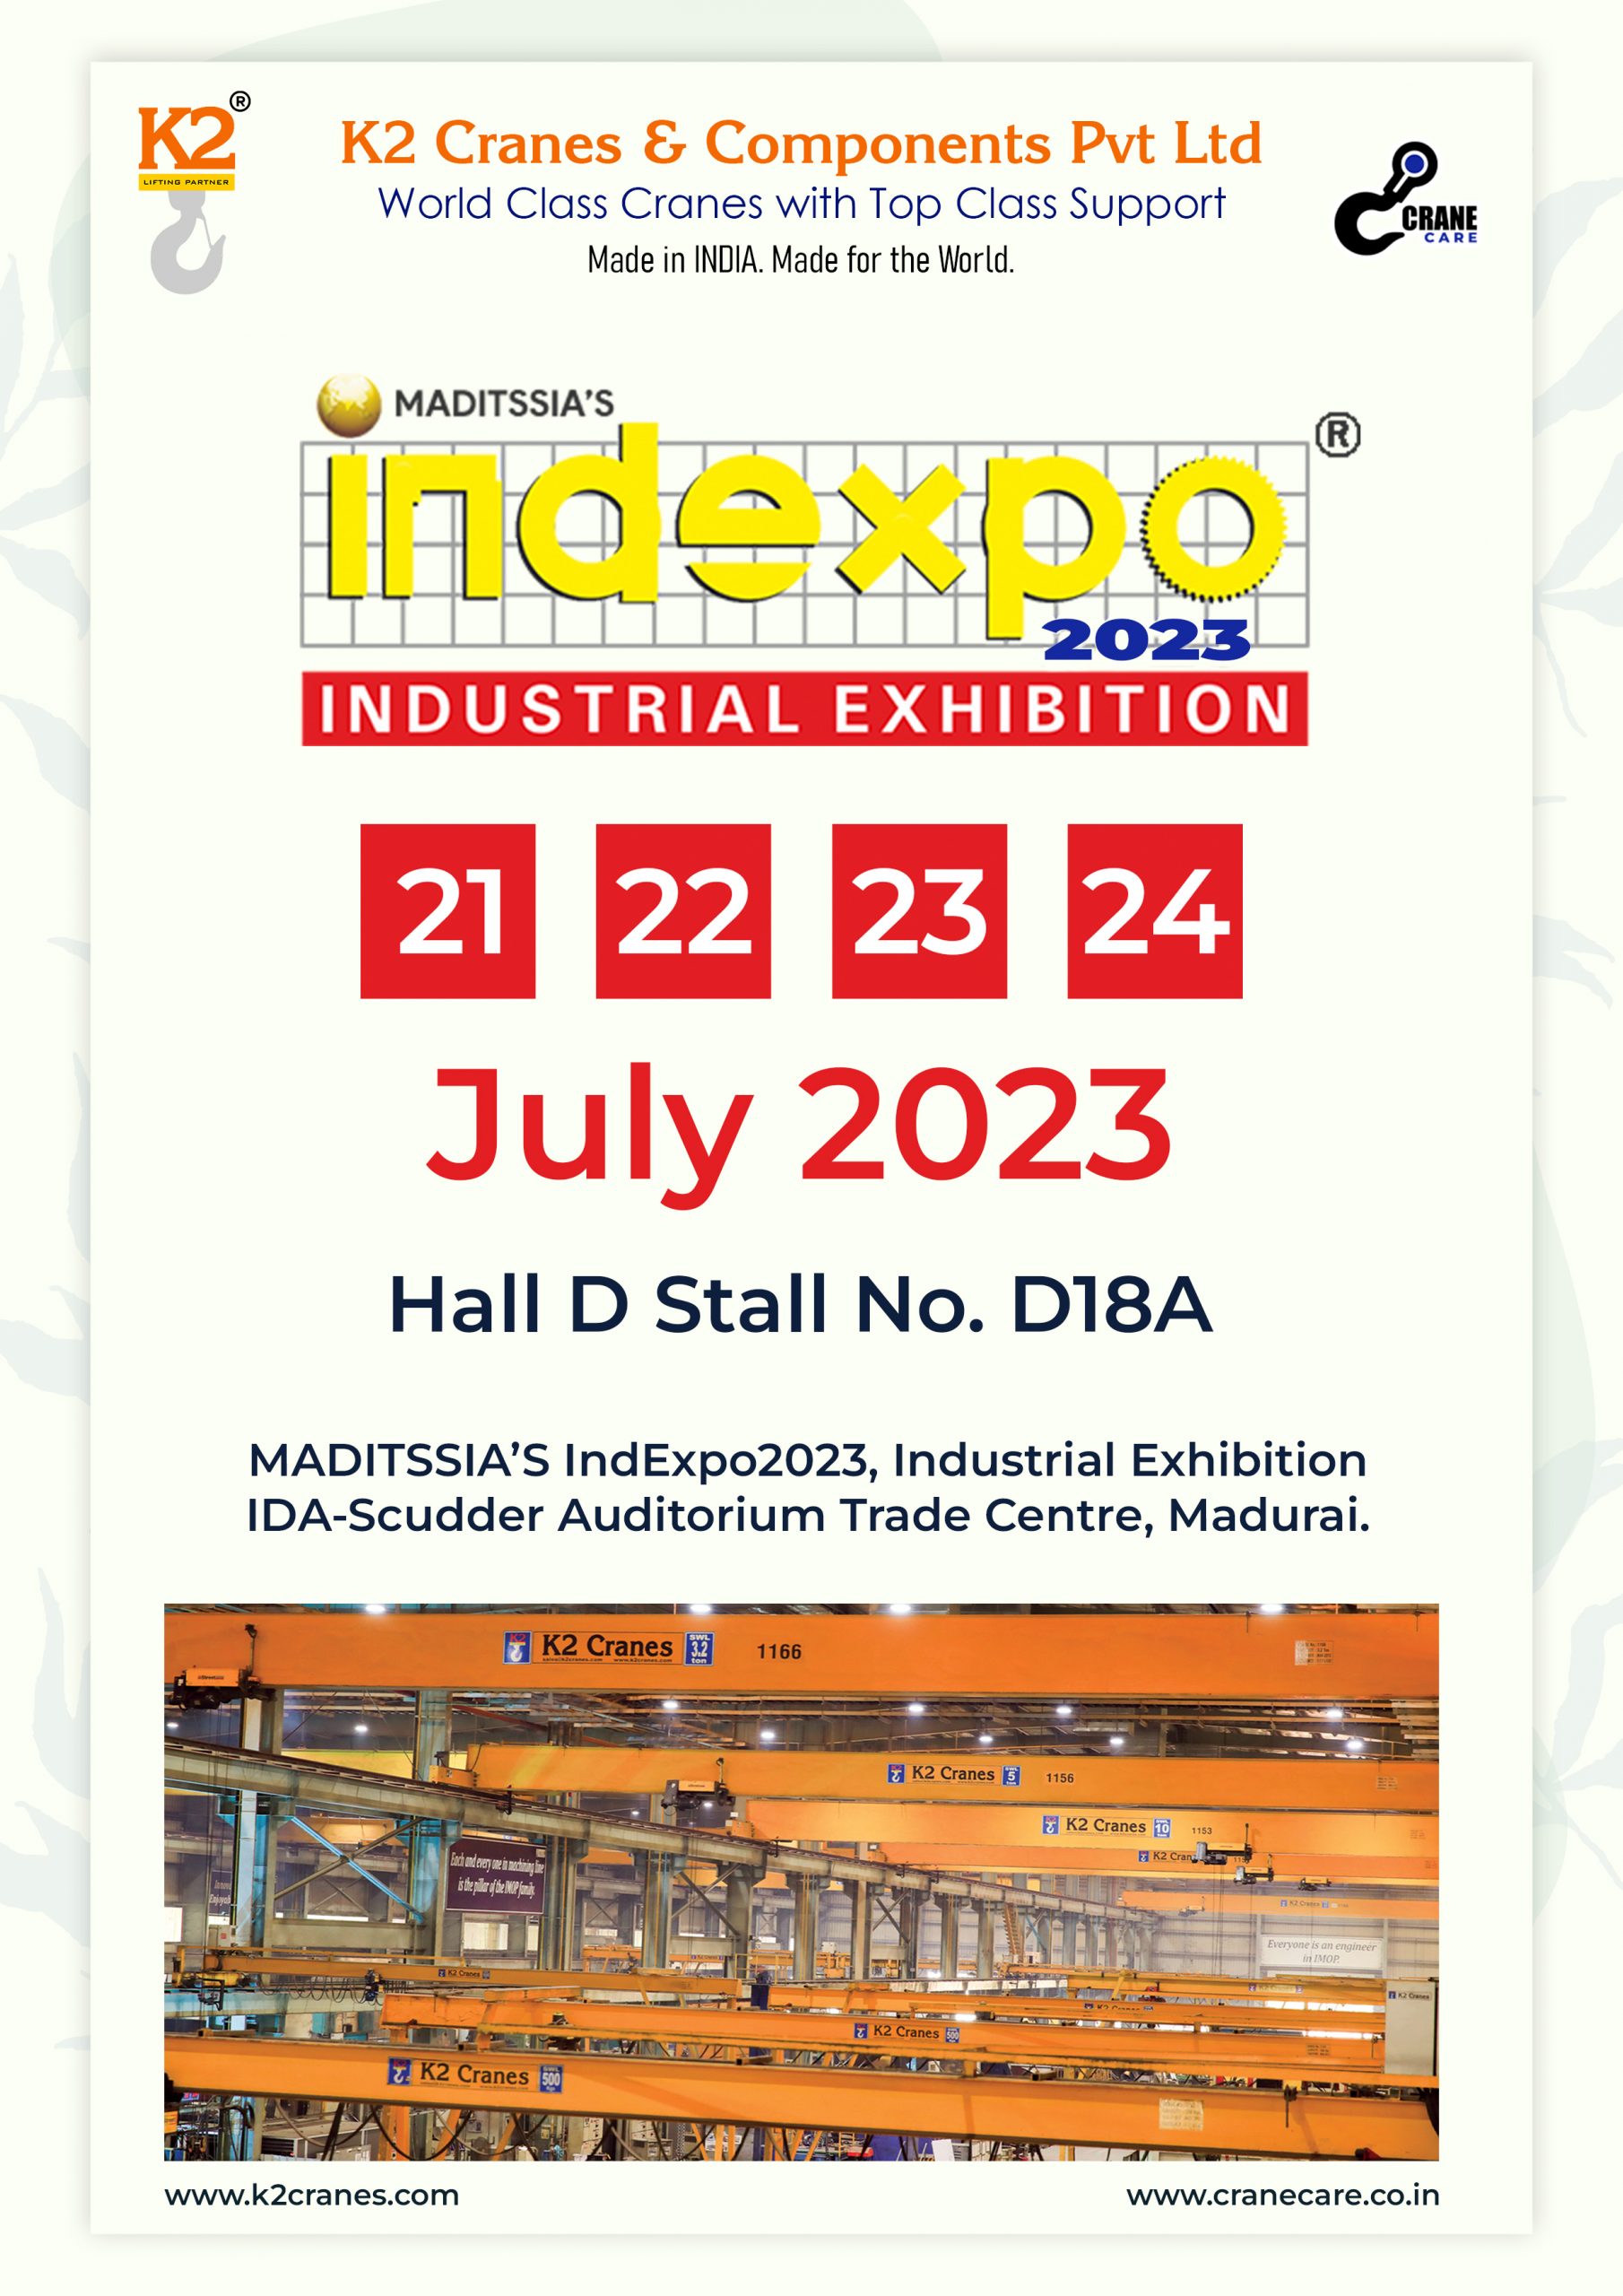 We are thrilled to invite you to visit our stall at INDEXPO 2023 – the Largest Industrial Exhibition organized by MADITSSIA